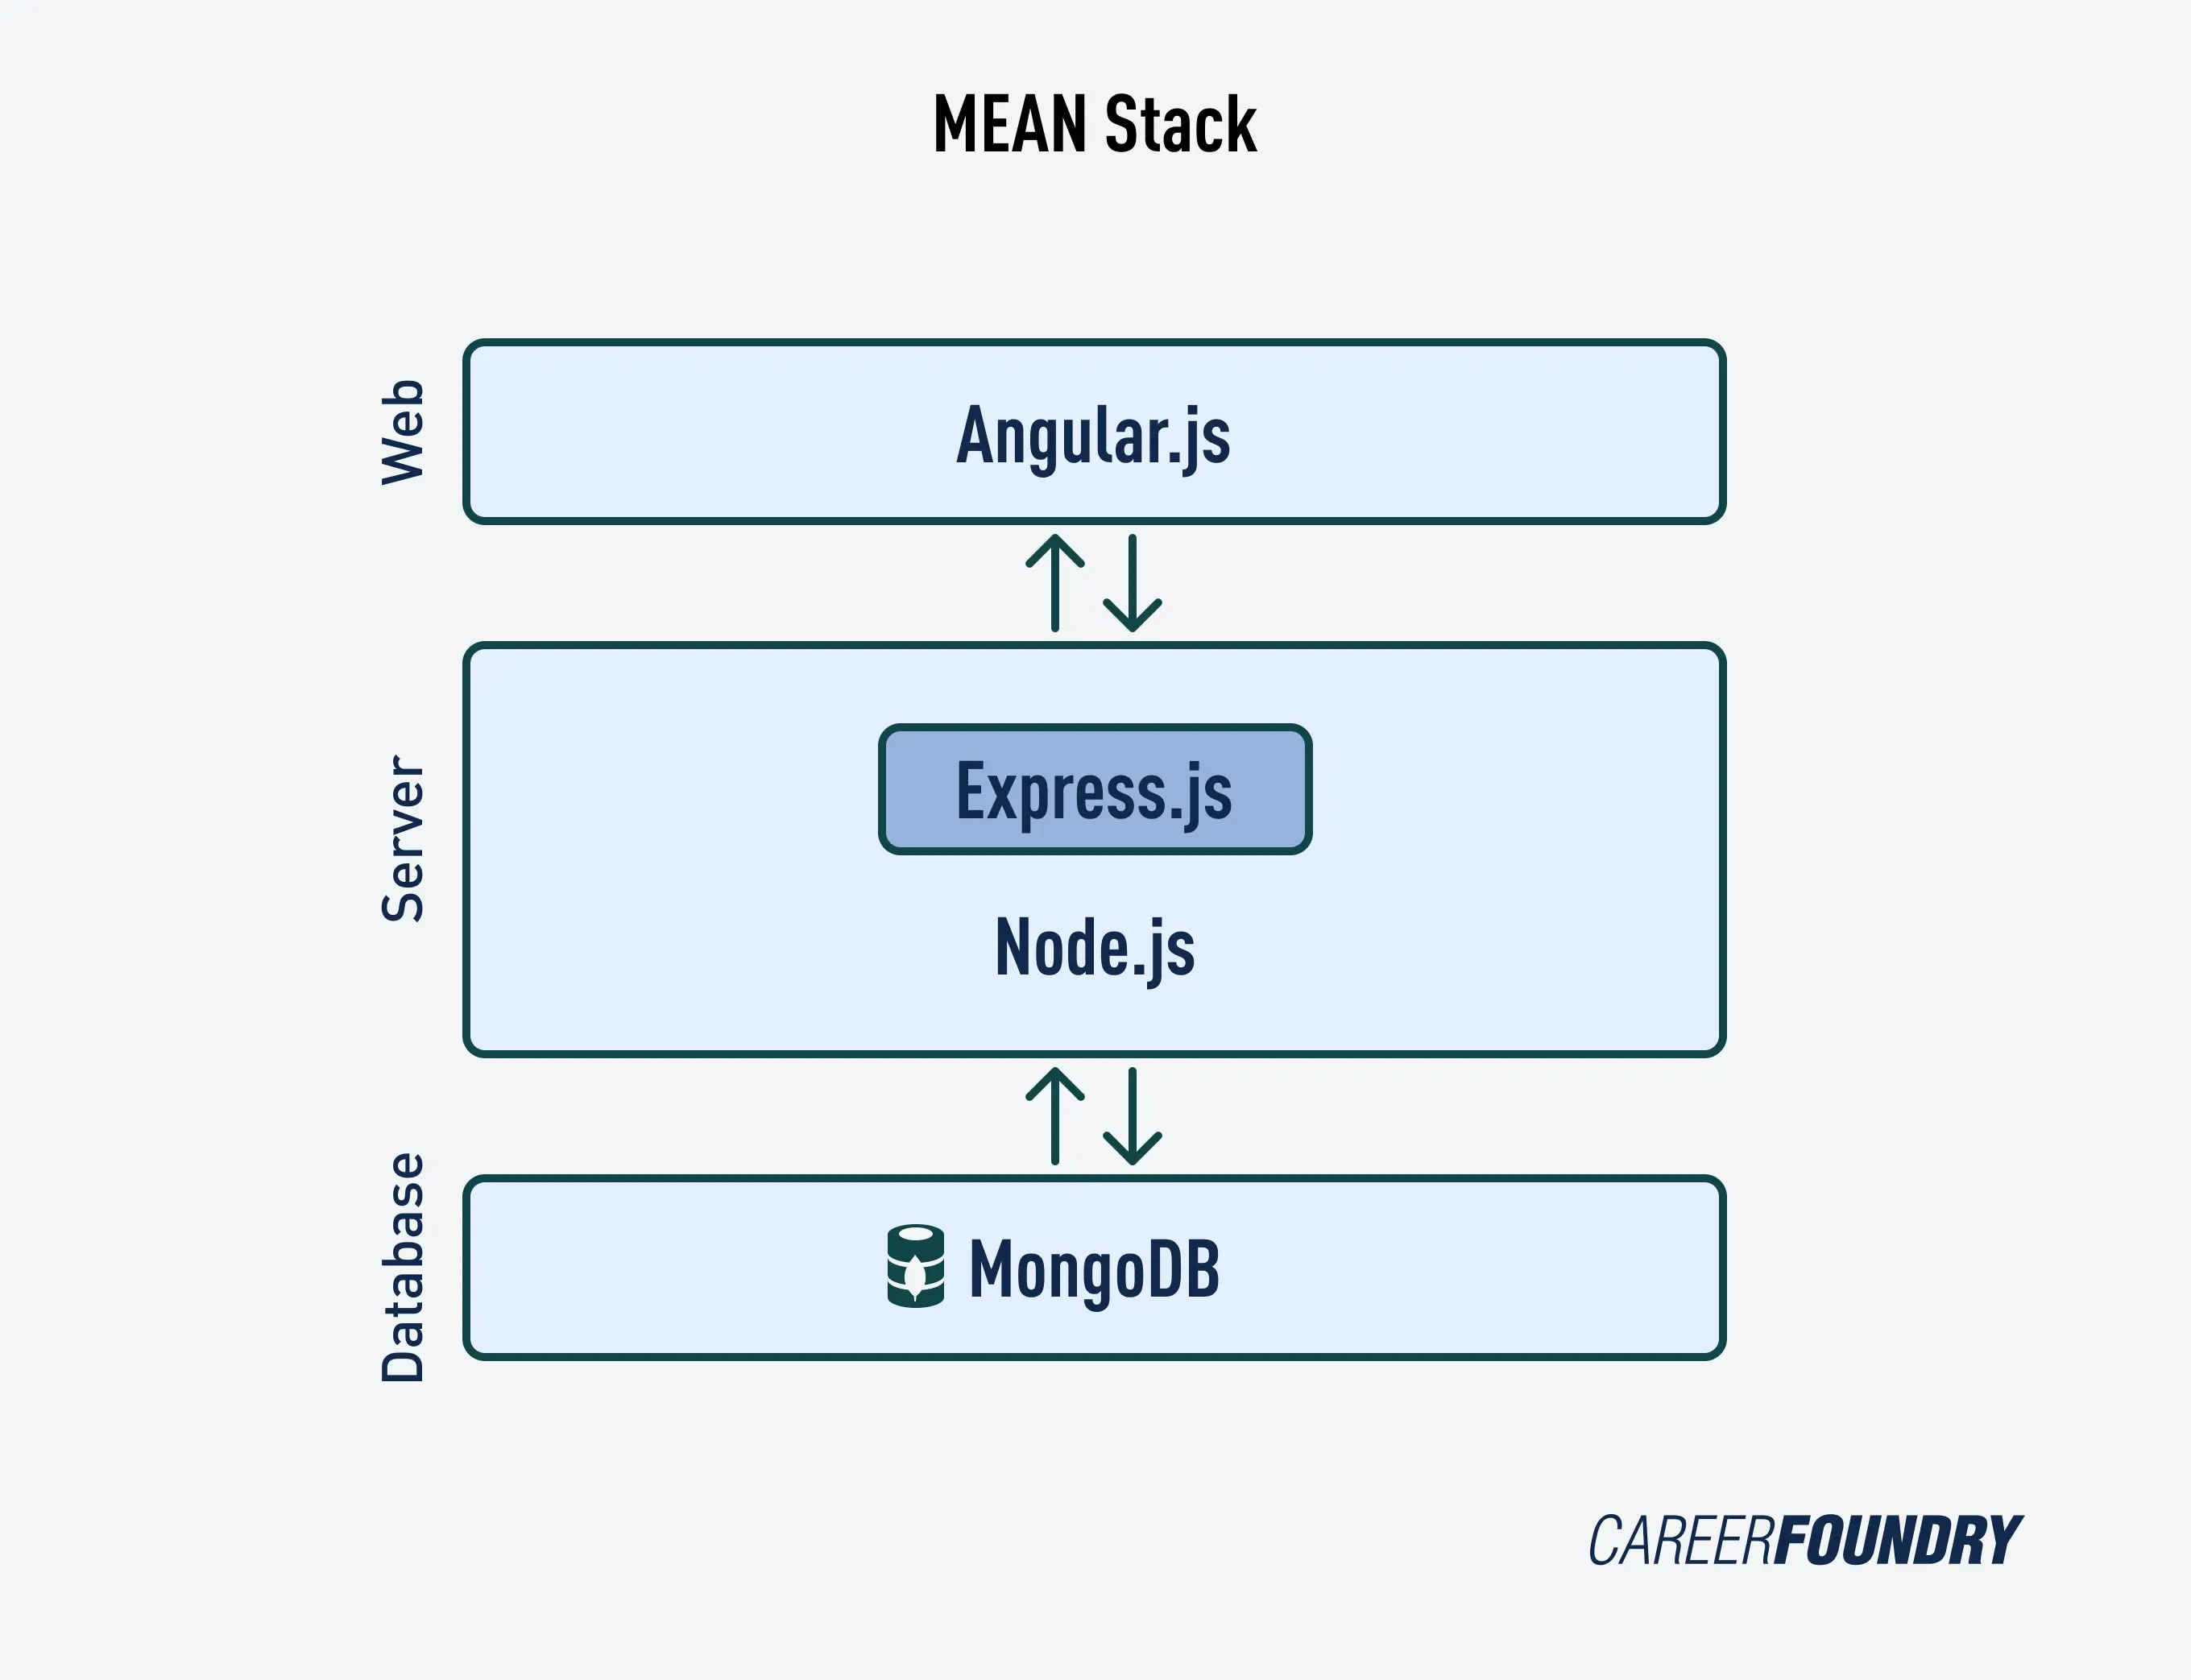 A graphic illustrating the MEAN Stack technologies: Angular, Express, Node, and MongoDB.